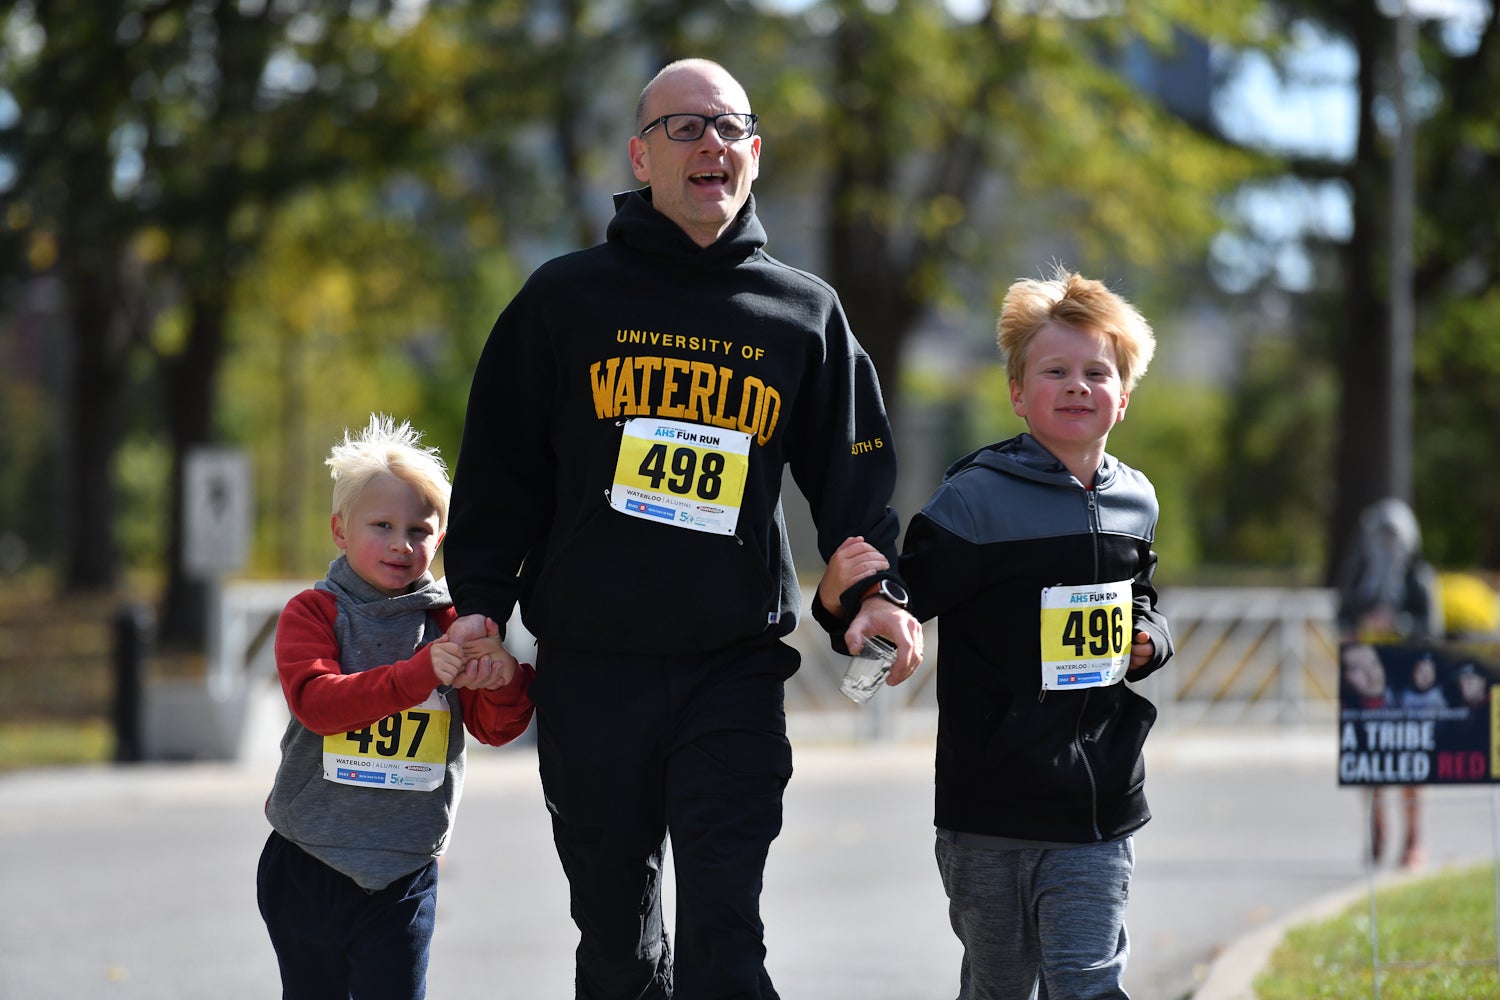 One father and two children running